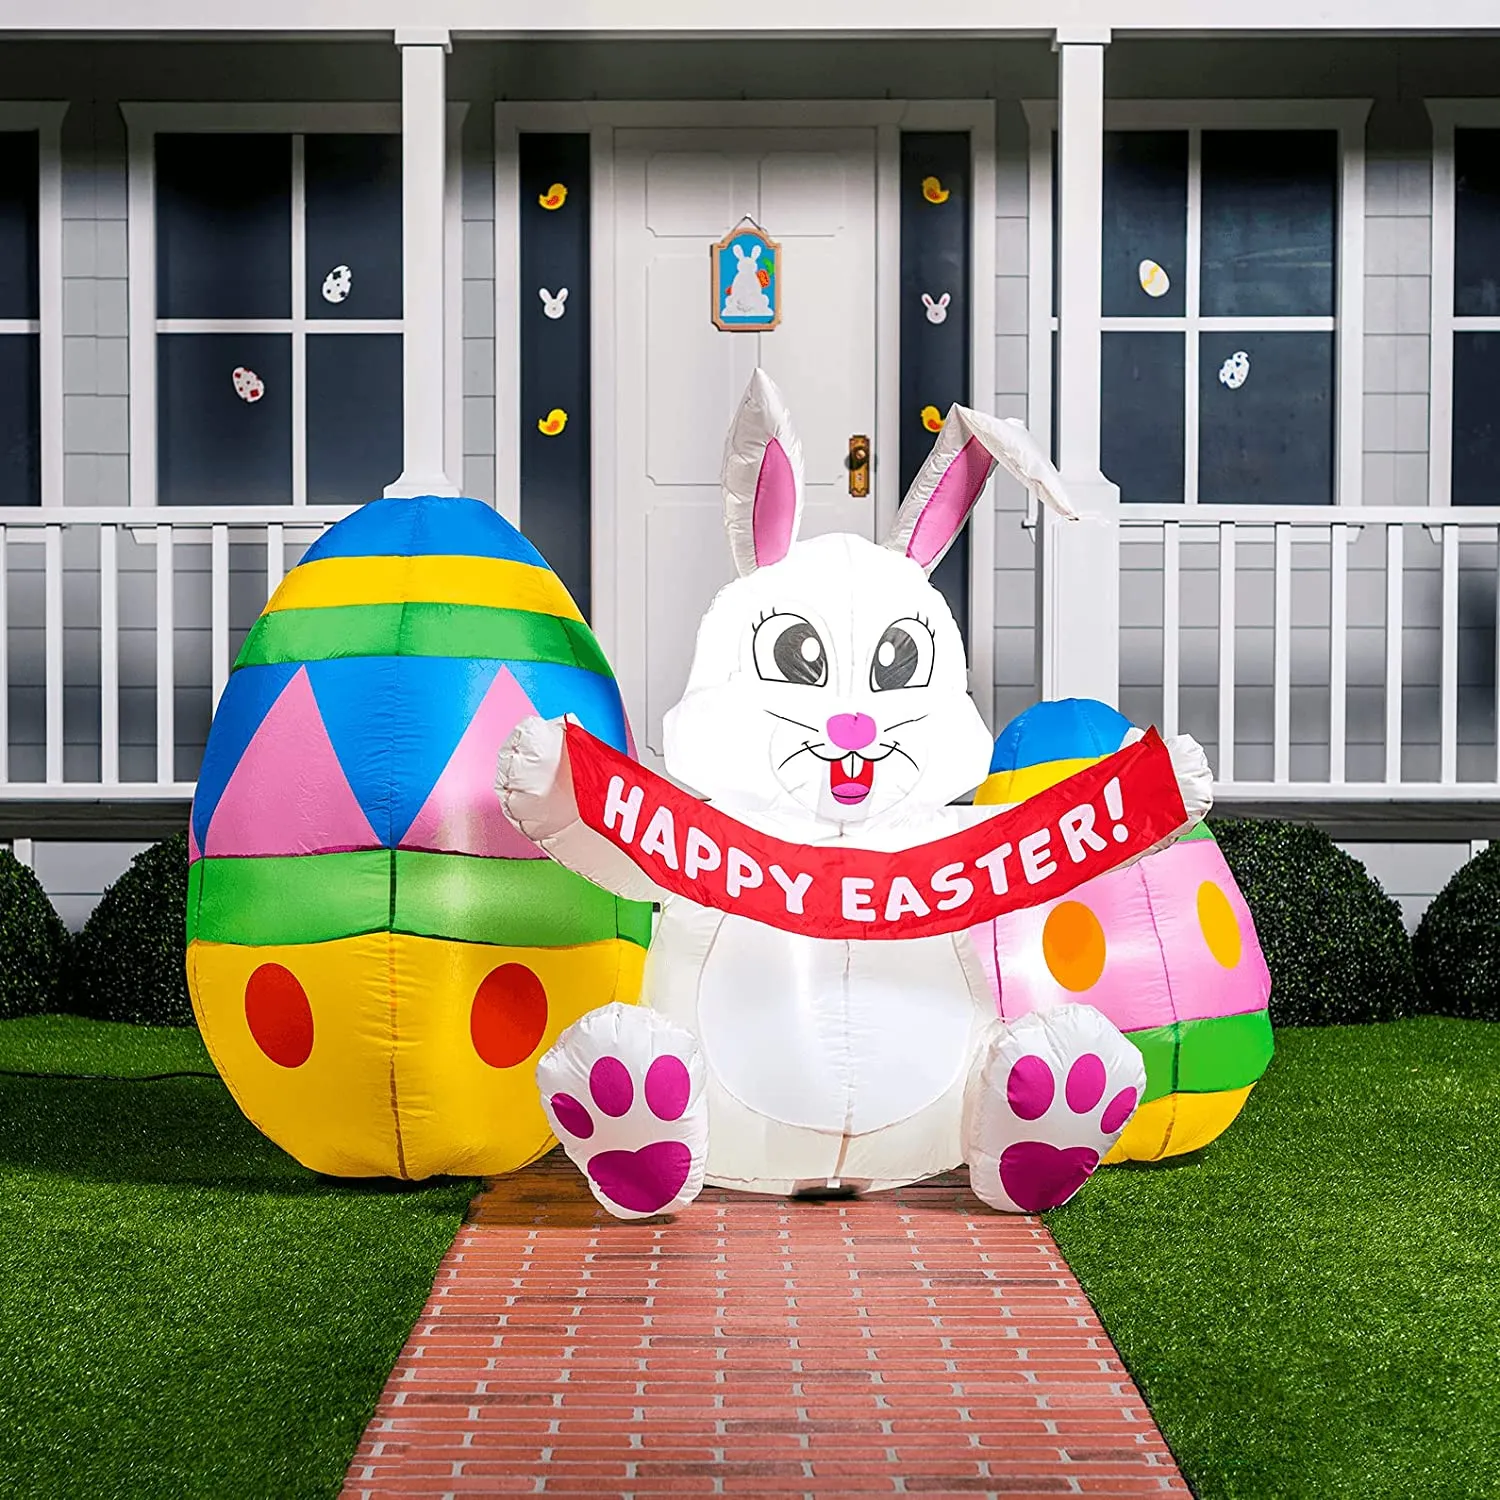 You are currently viewing Are there customizable options for Inflatable Easter Decorations?